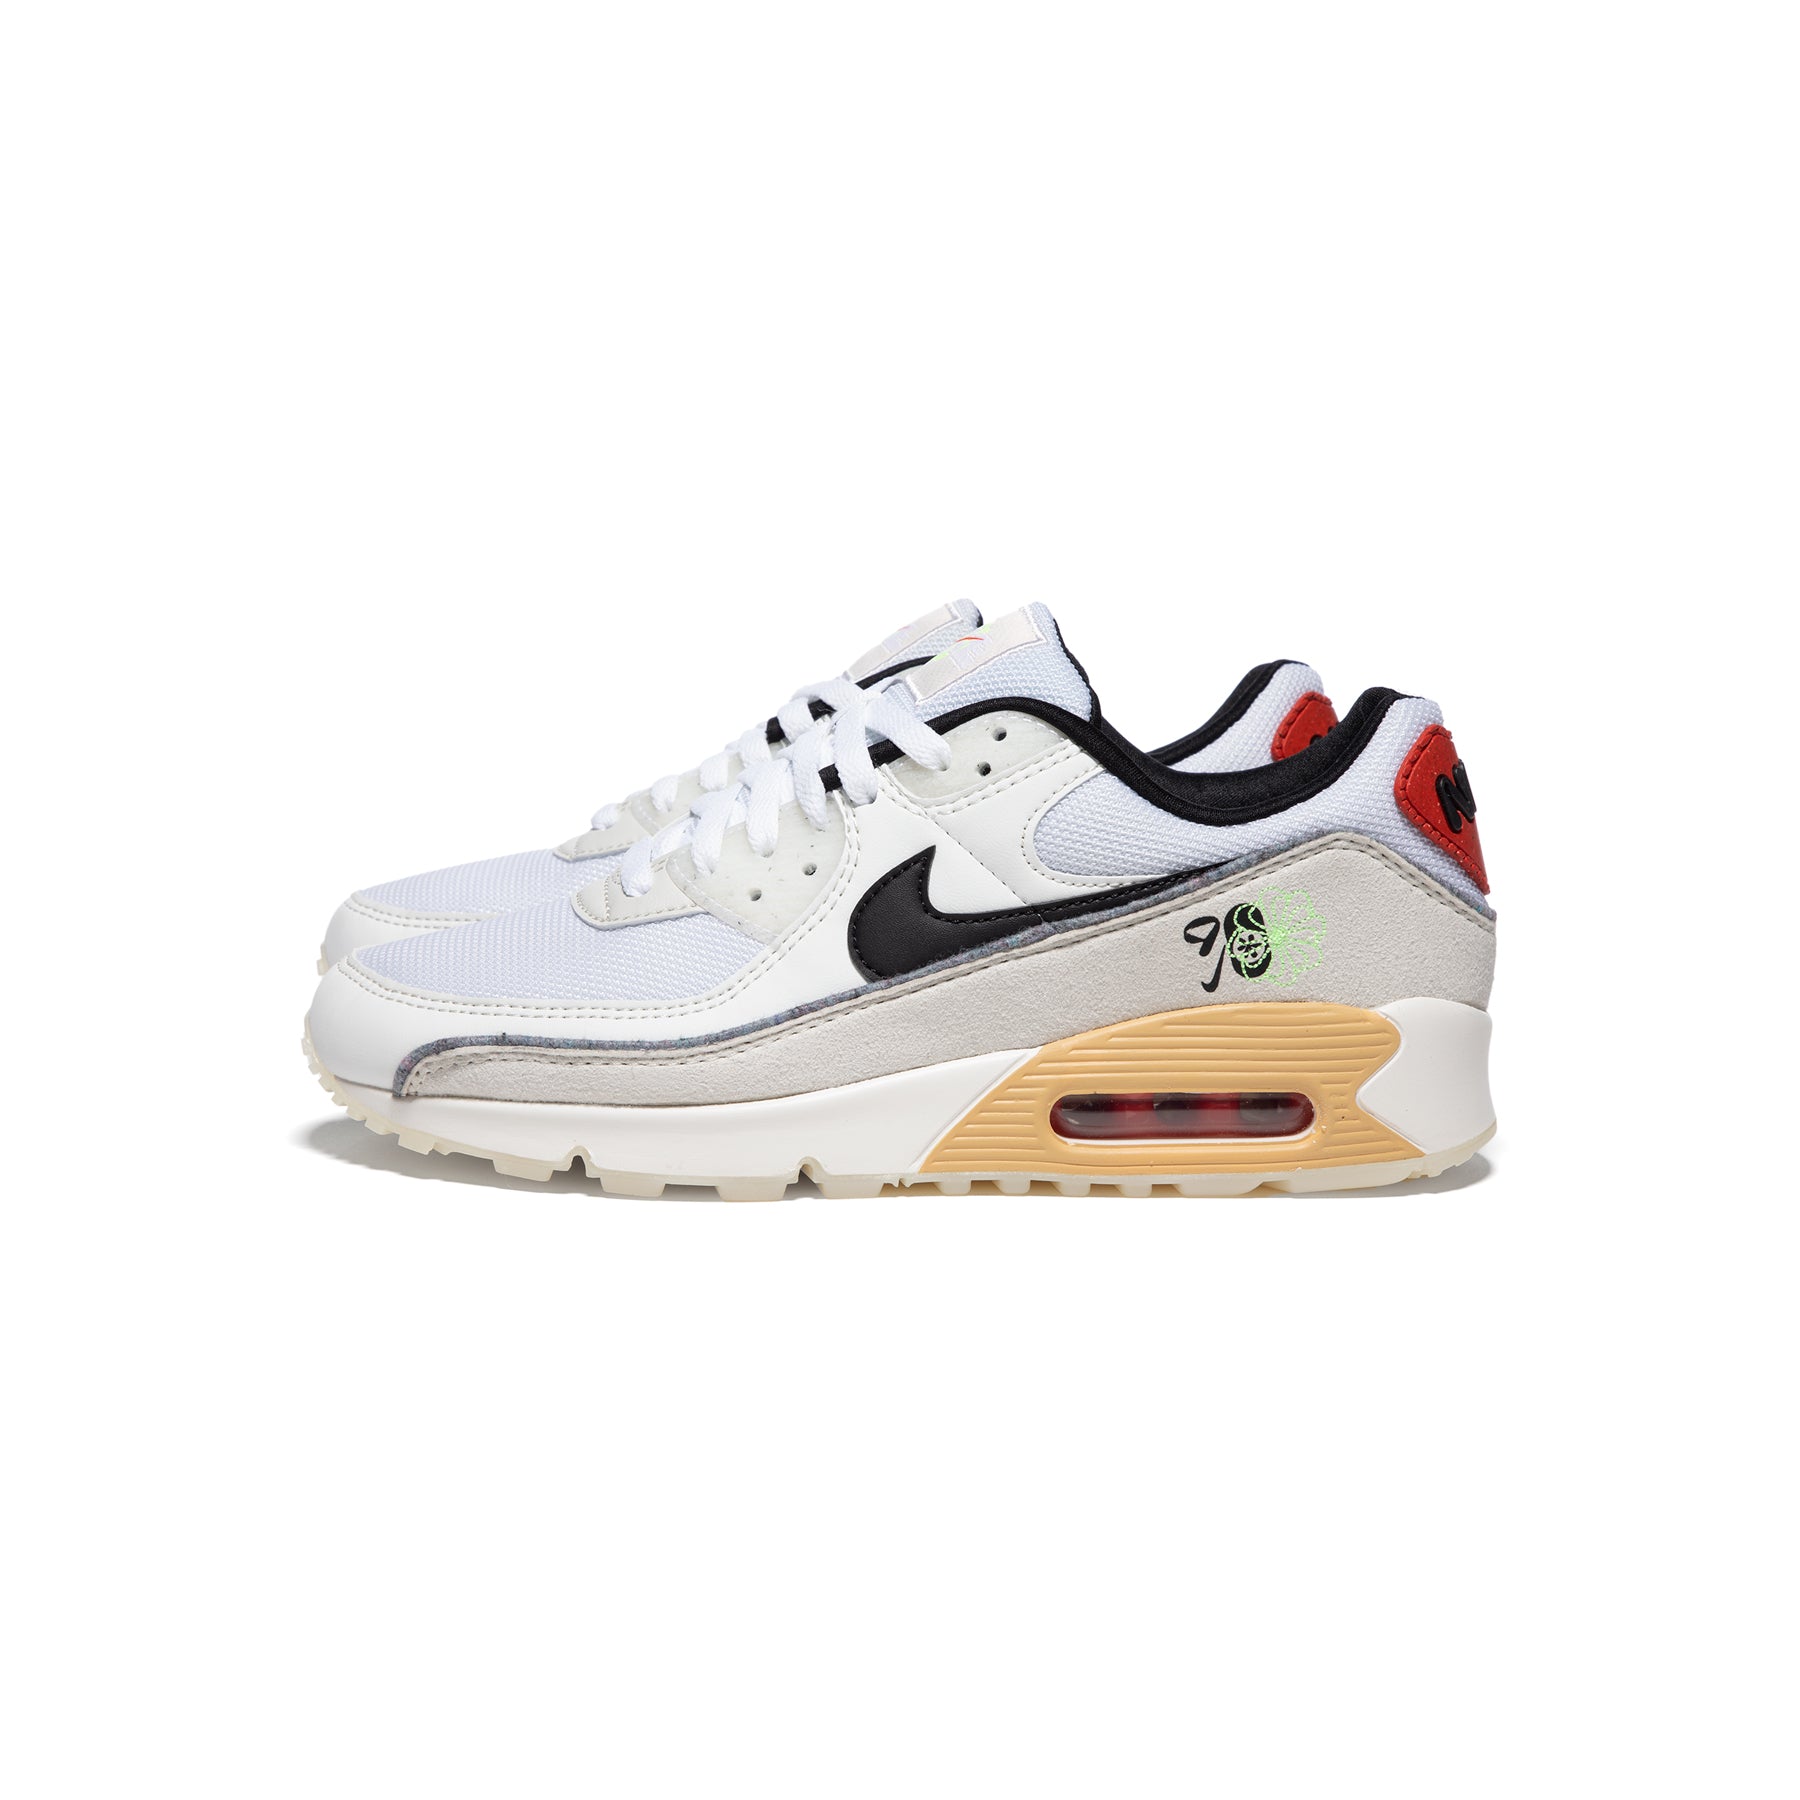 Nike Air Max 90 PRM (Gym Red/Pale Ivory/Habanero Red) – CNCPTS